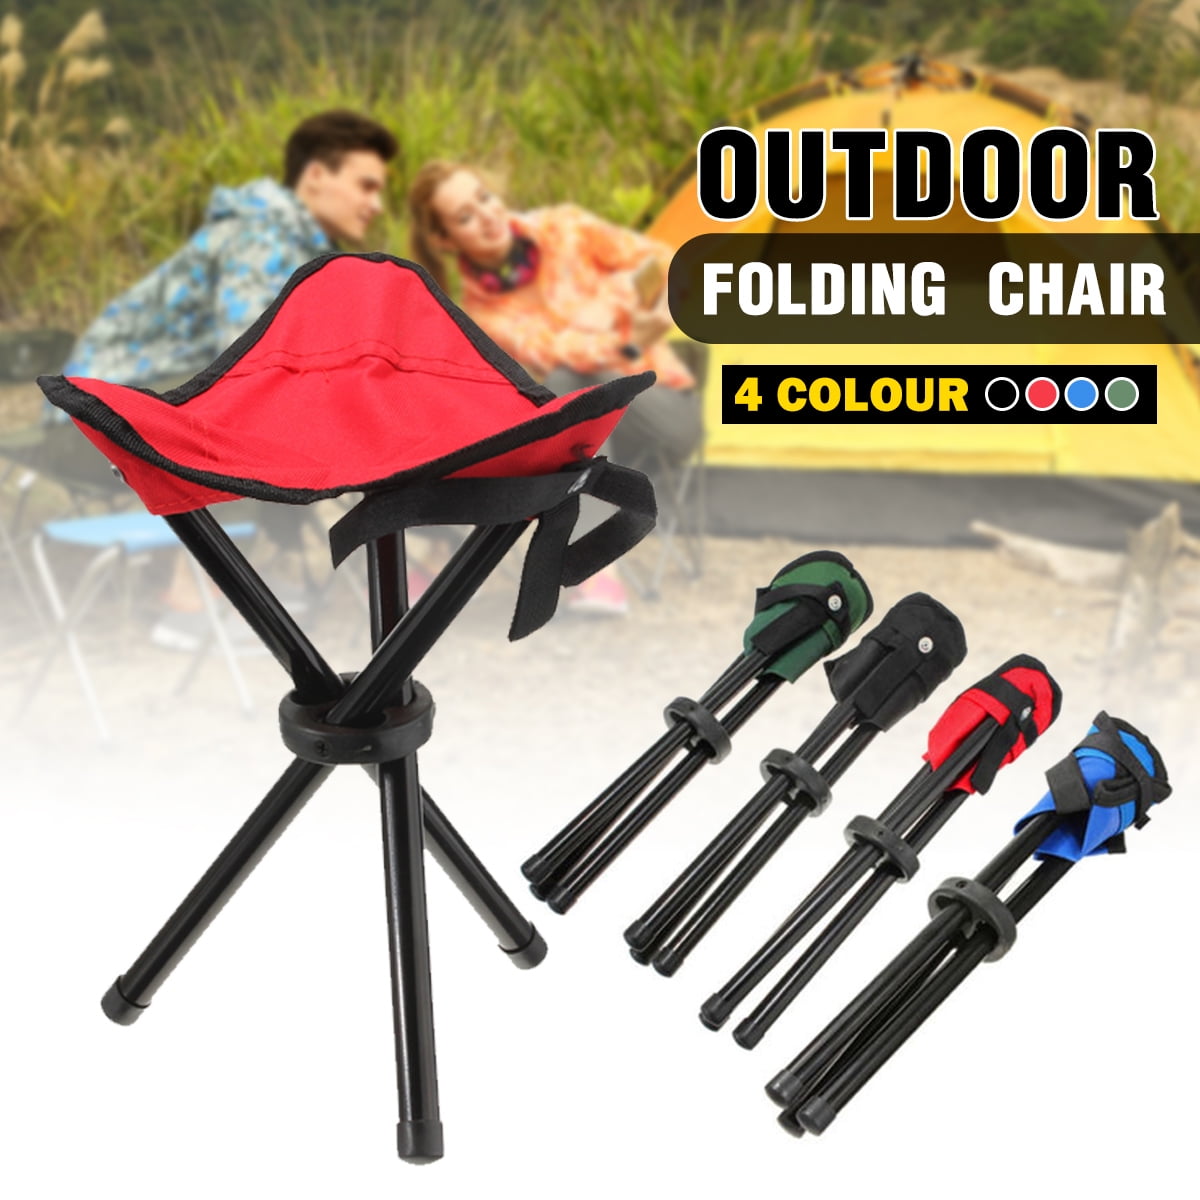 Outdoor folding chair travel portable chair leisure camping stool camping 